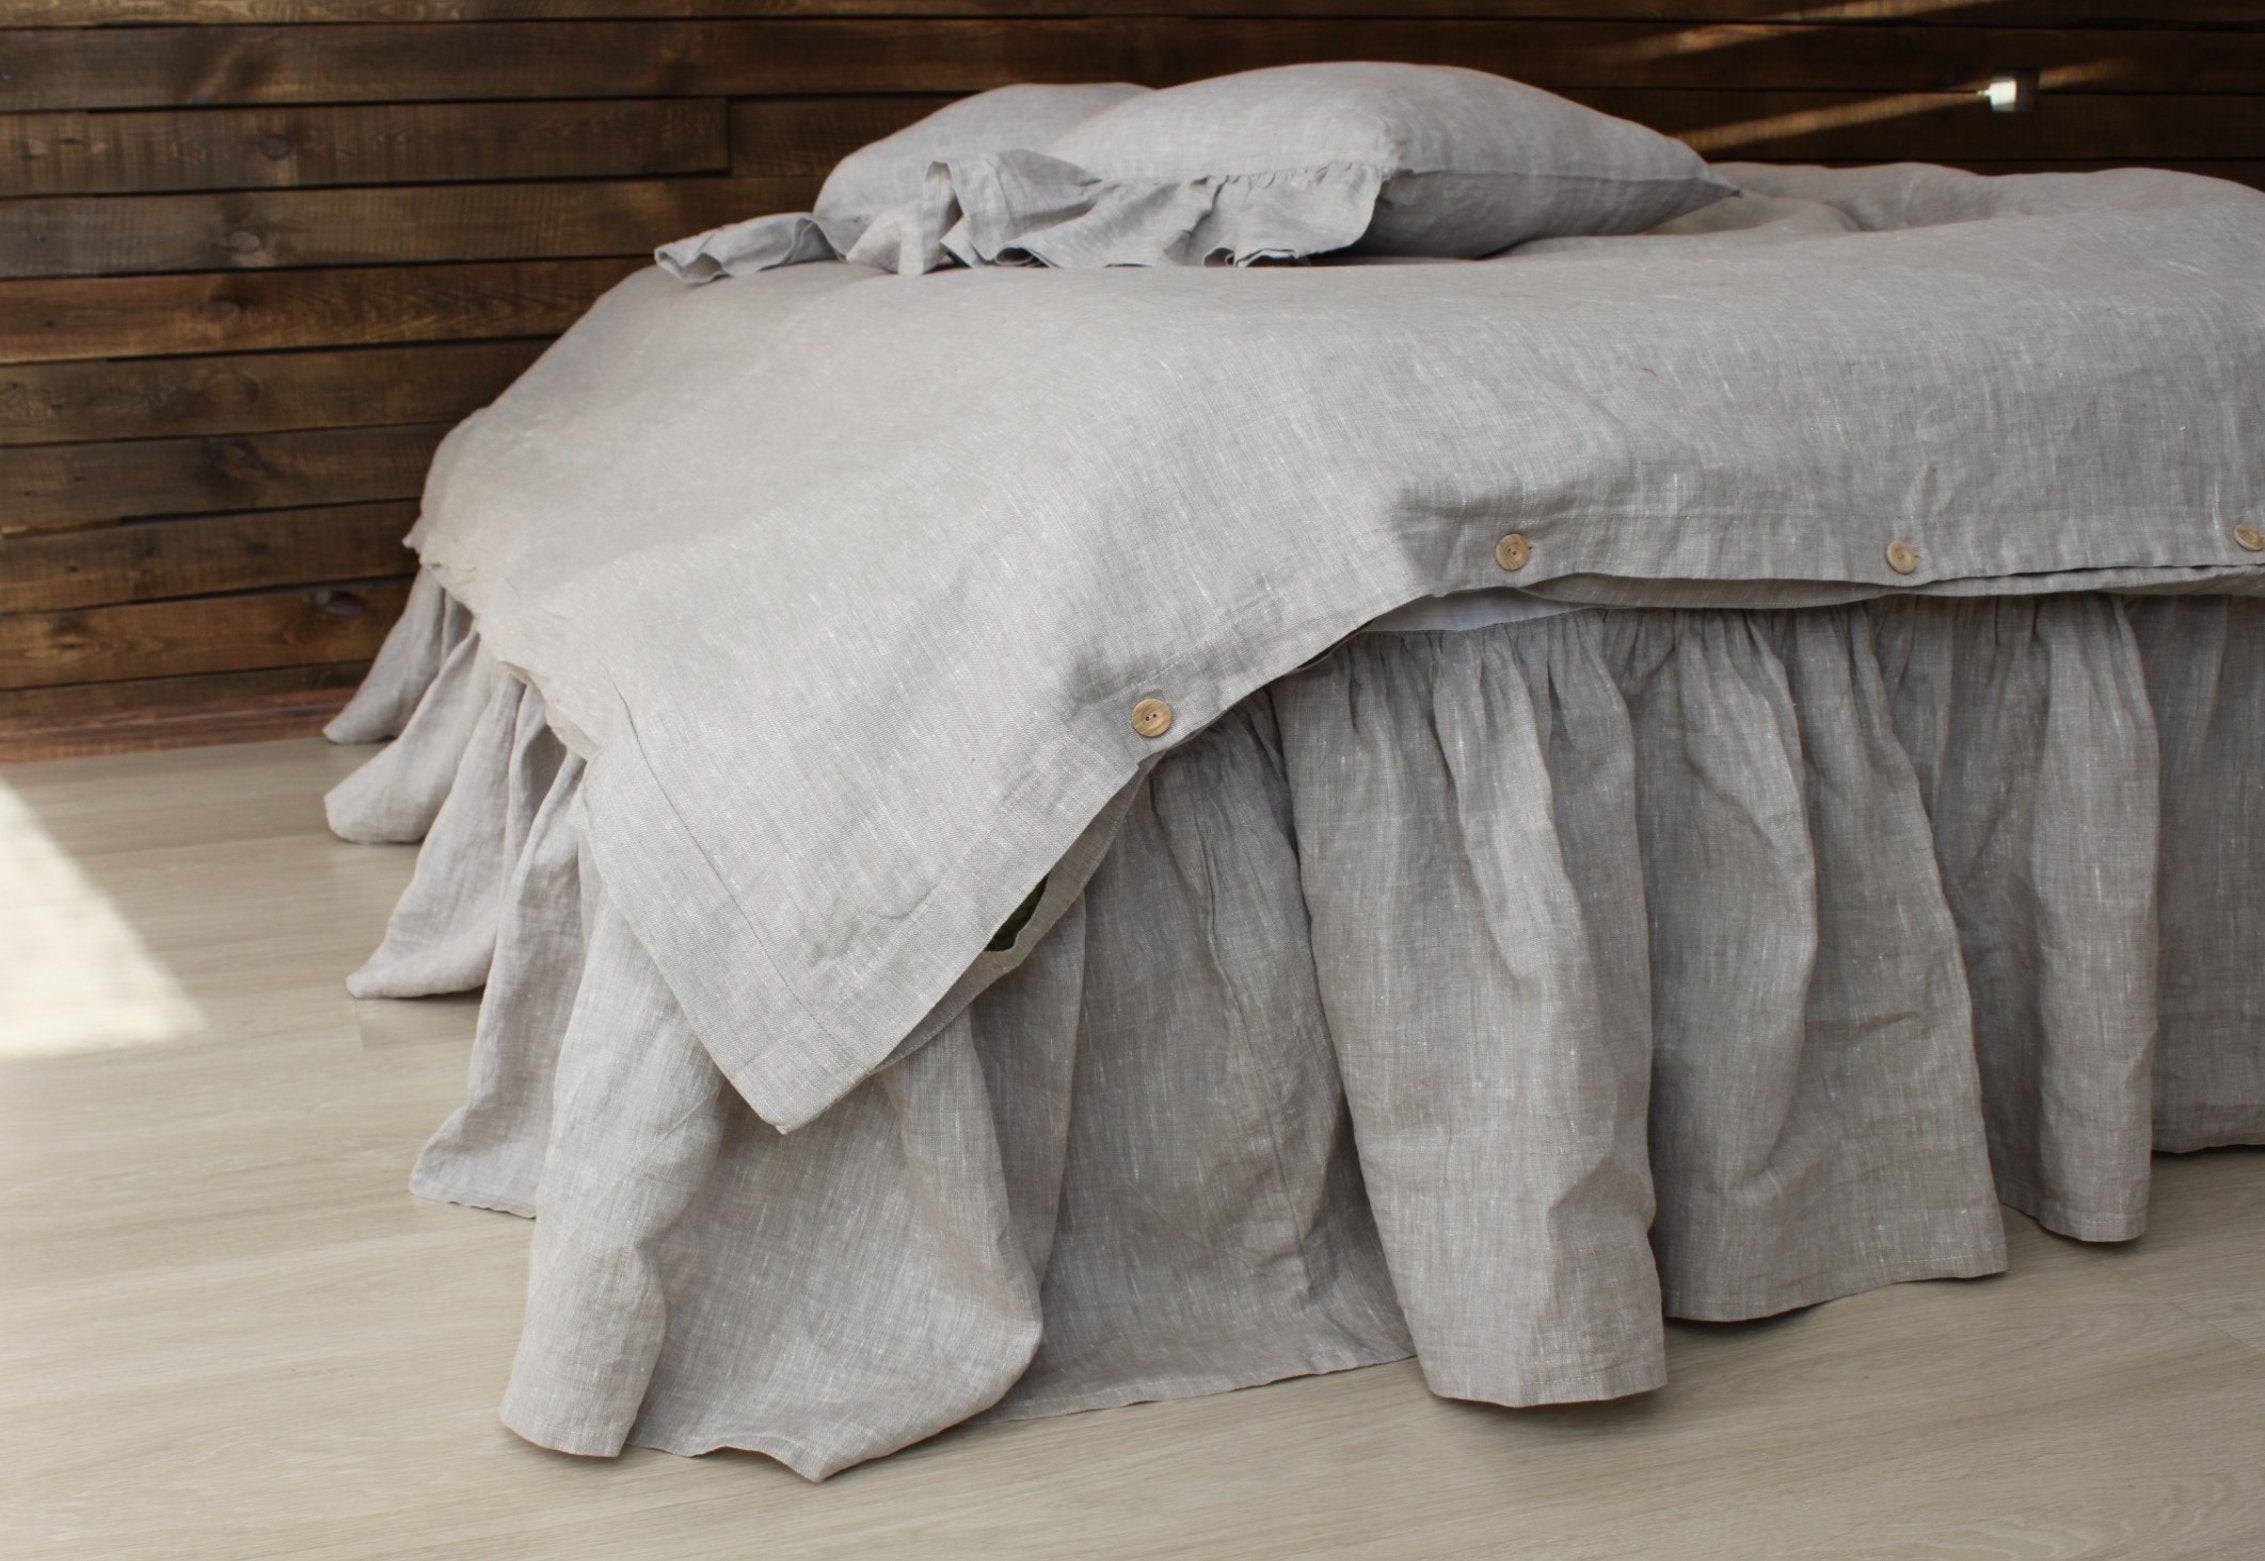 Linen Bed Skirt with Gathered Ruffles and Cotton Decking - in Gray, Green,  White and more color options - Various Mattress Sizes and Drop